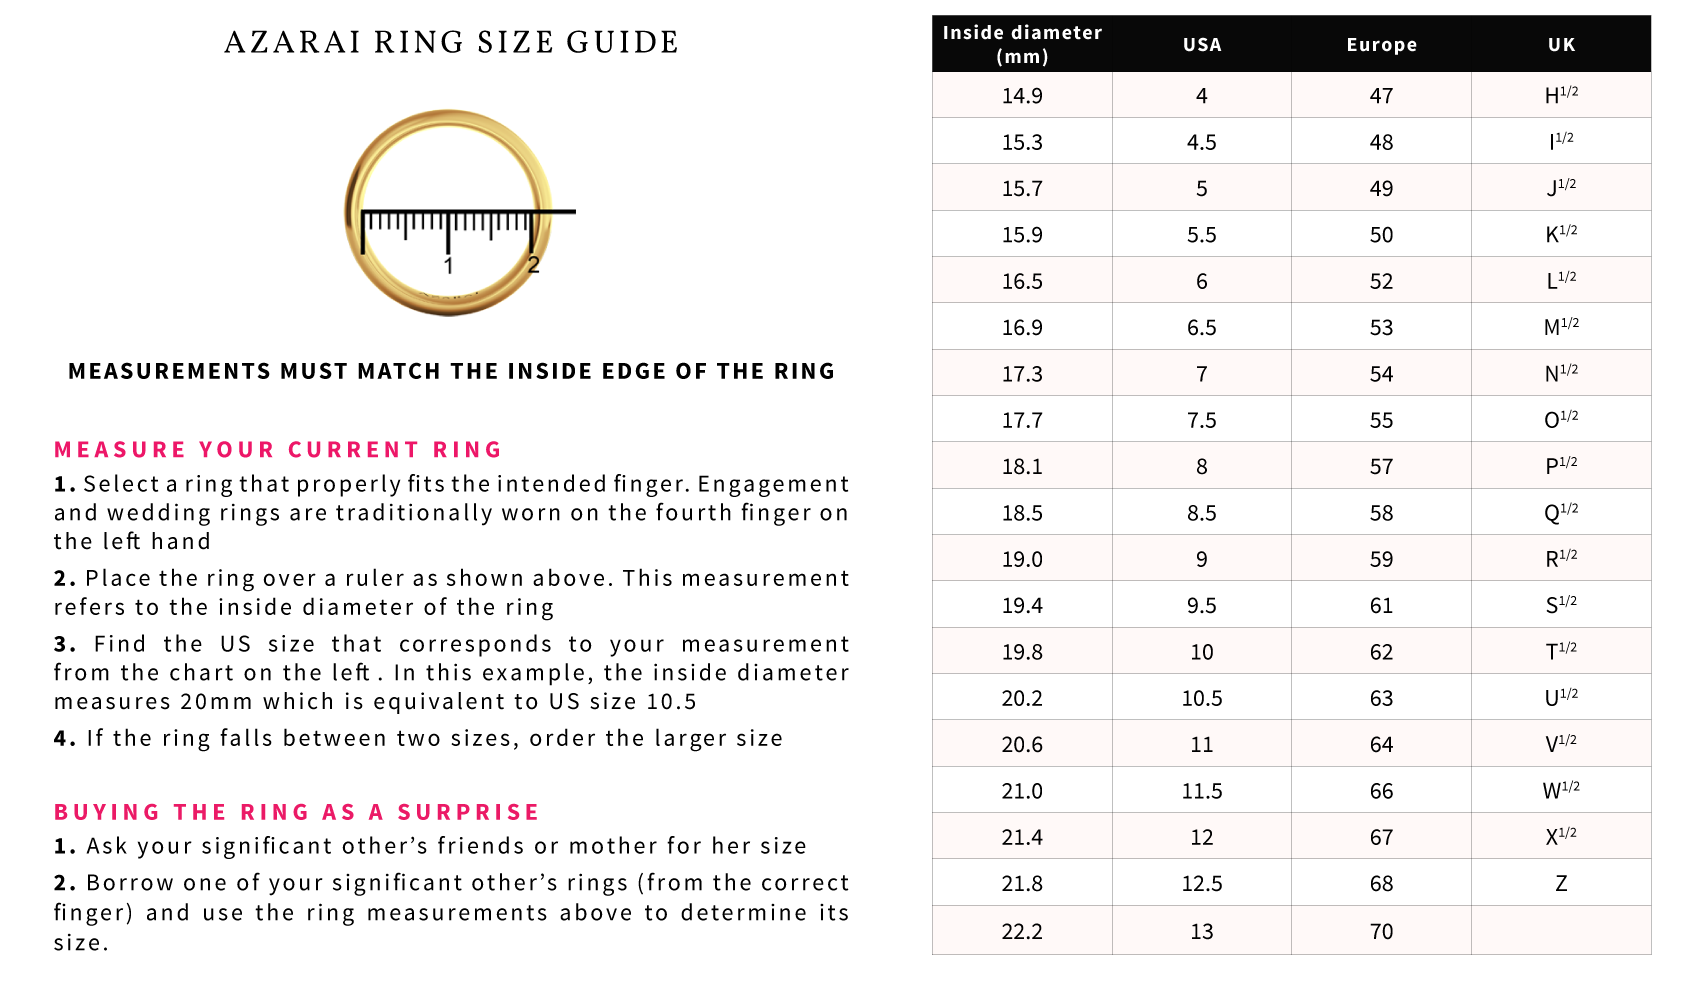 Azarai Jewelers - How to find your ring size - Nigeria